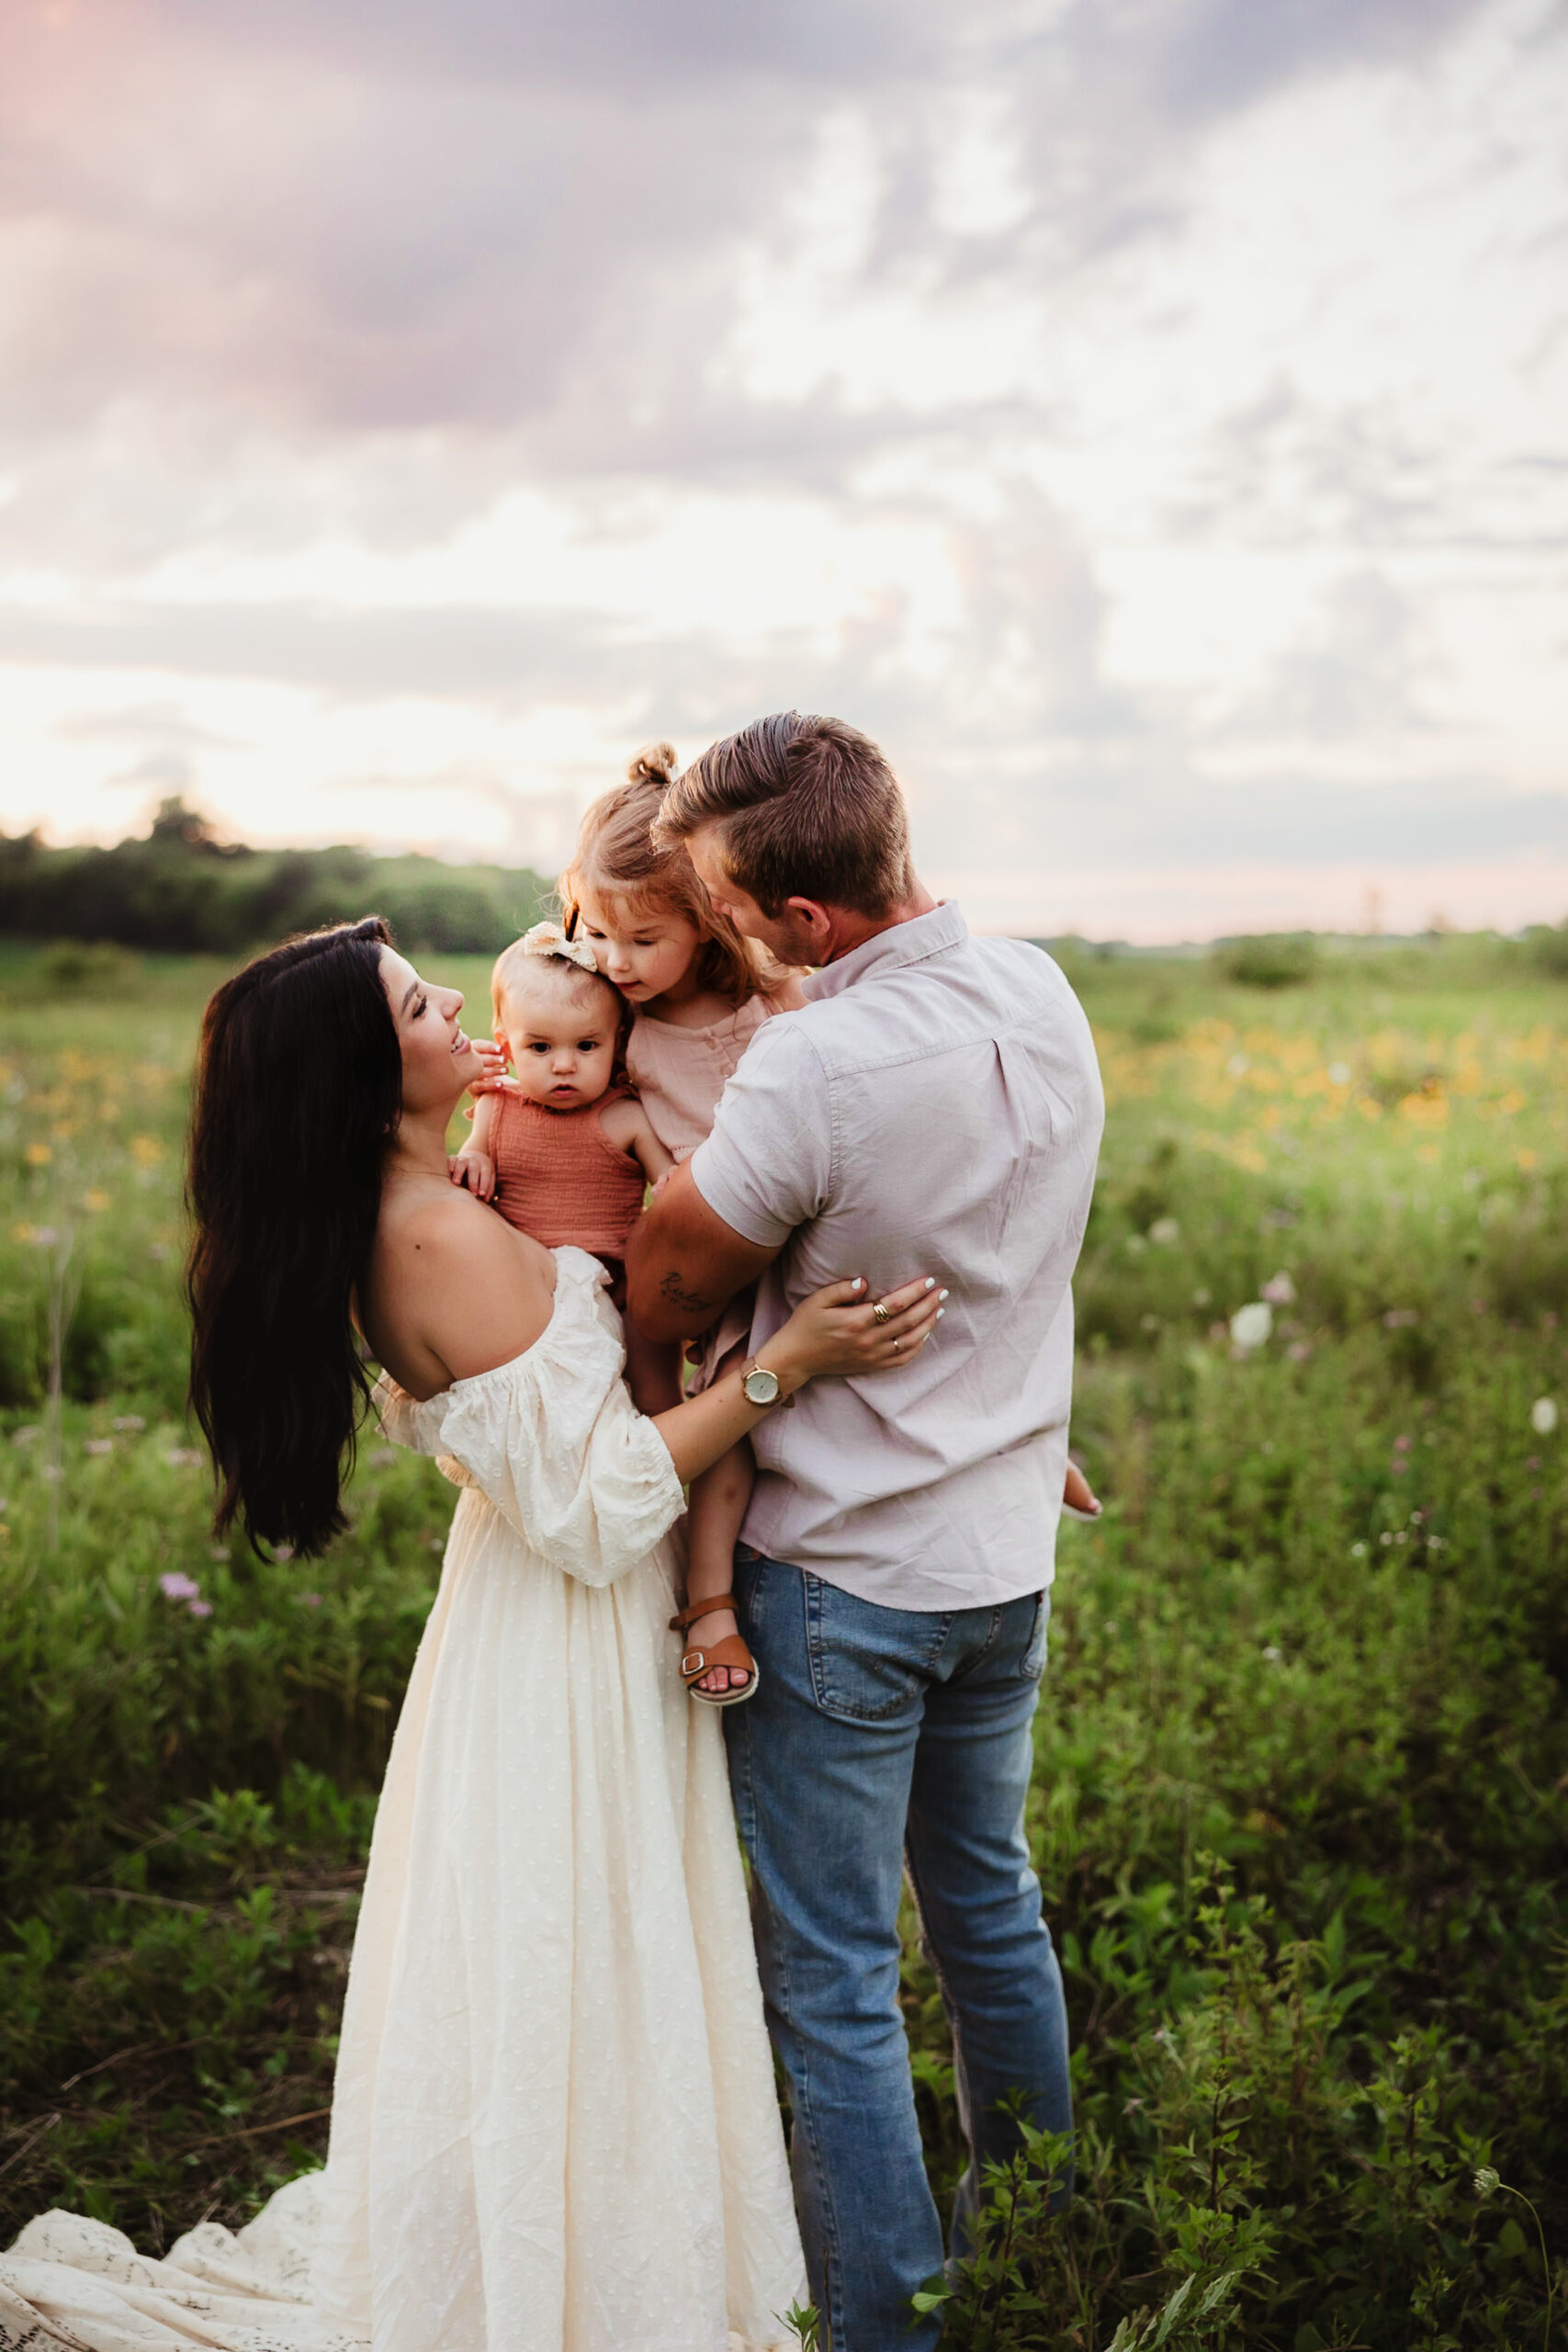 A family of four embraces each other in a wildflower field during sunset.